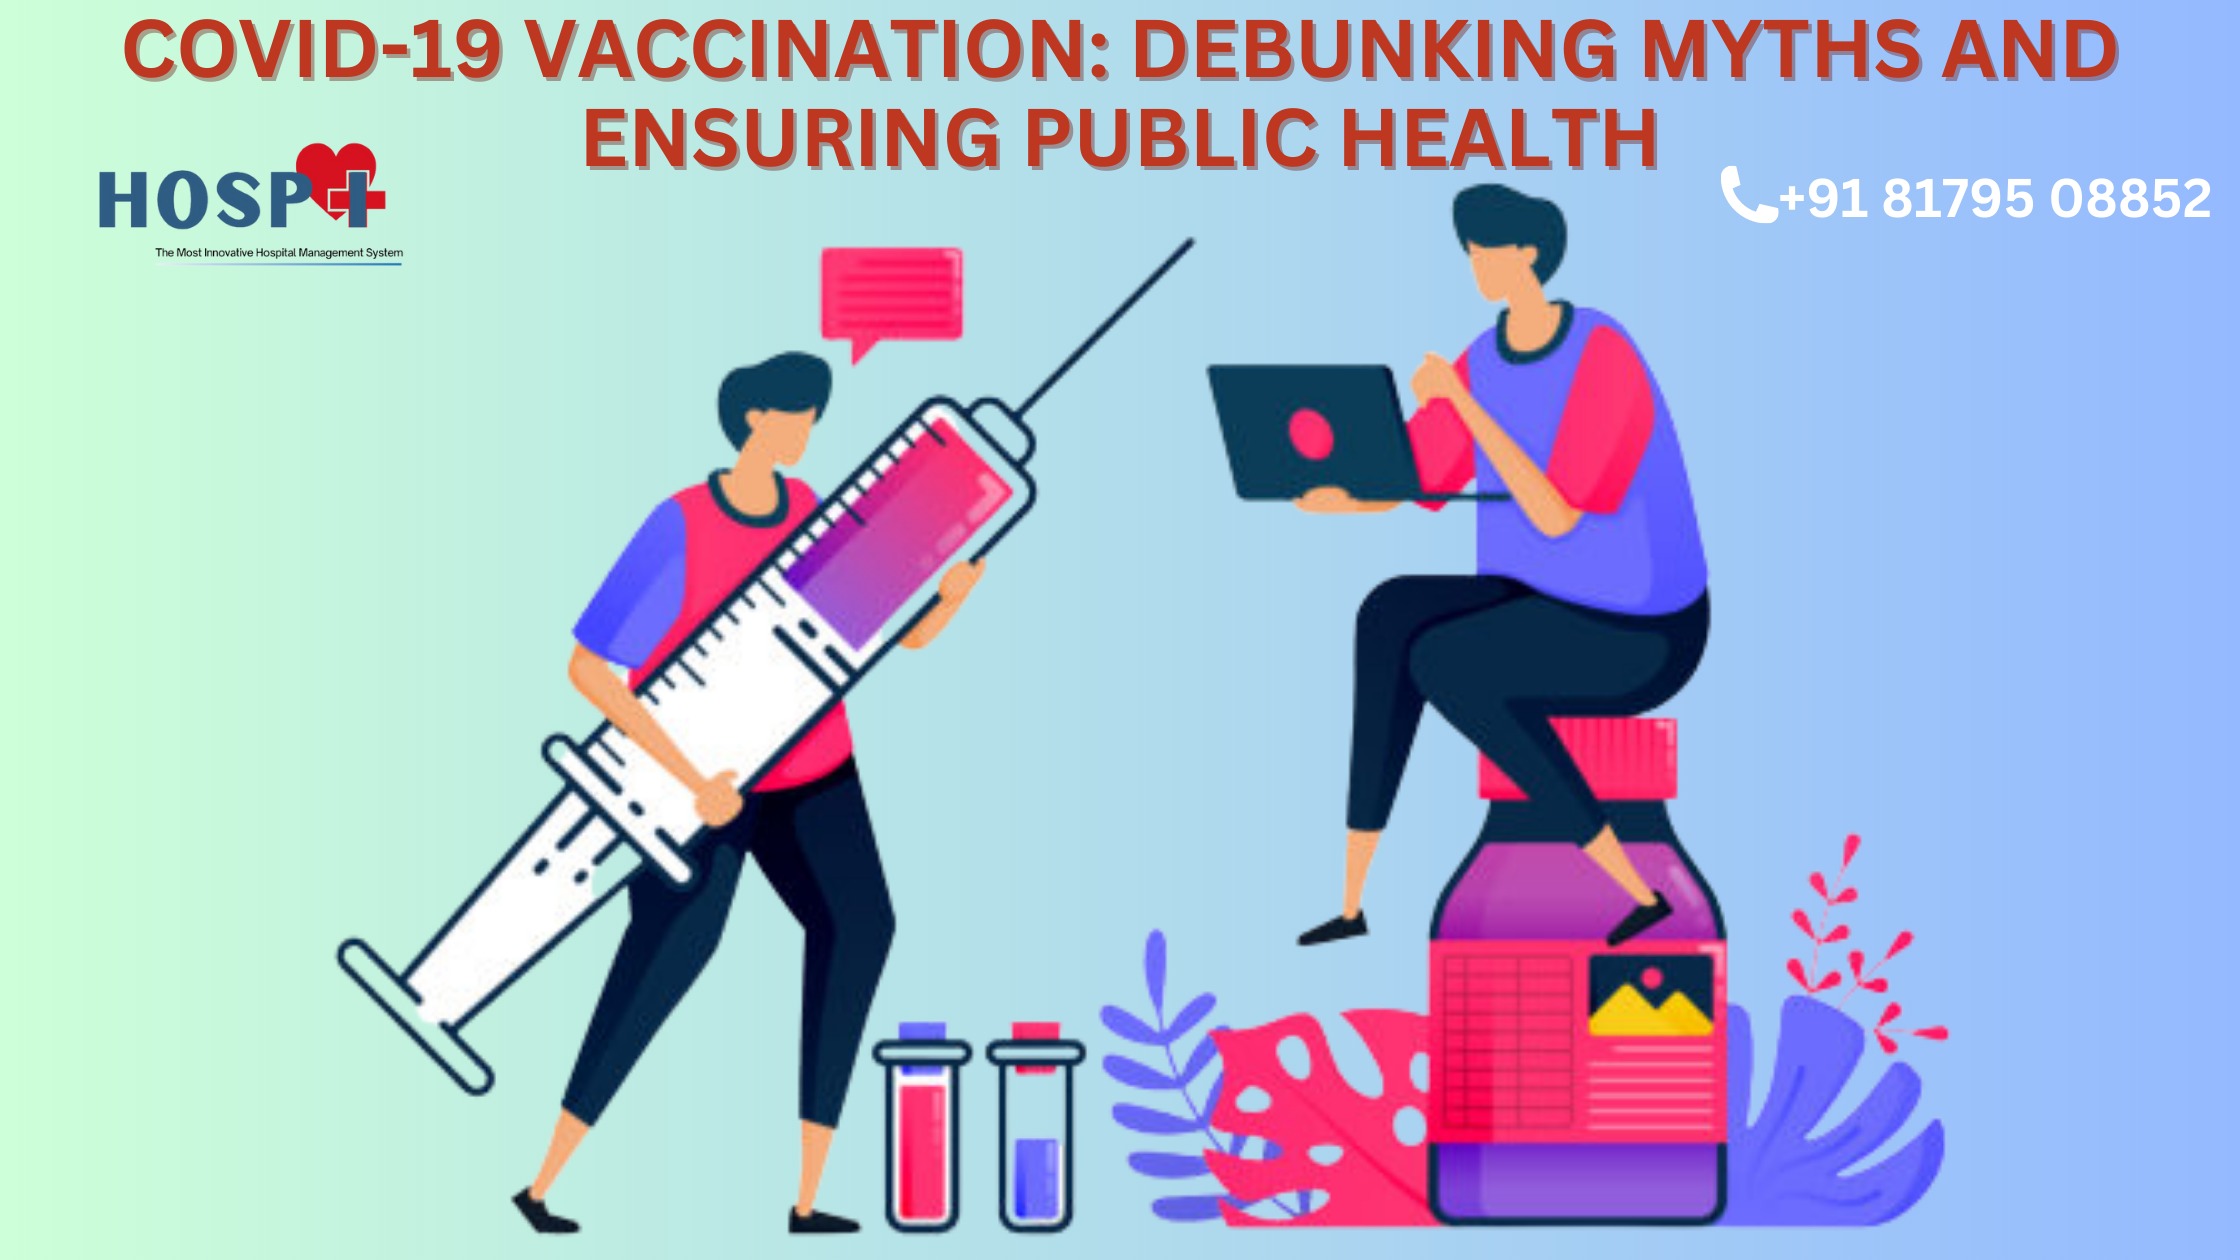 COVID-19 Vaccination: Debunking Myths and Ensuring Public Health